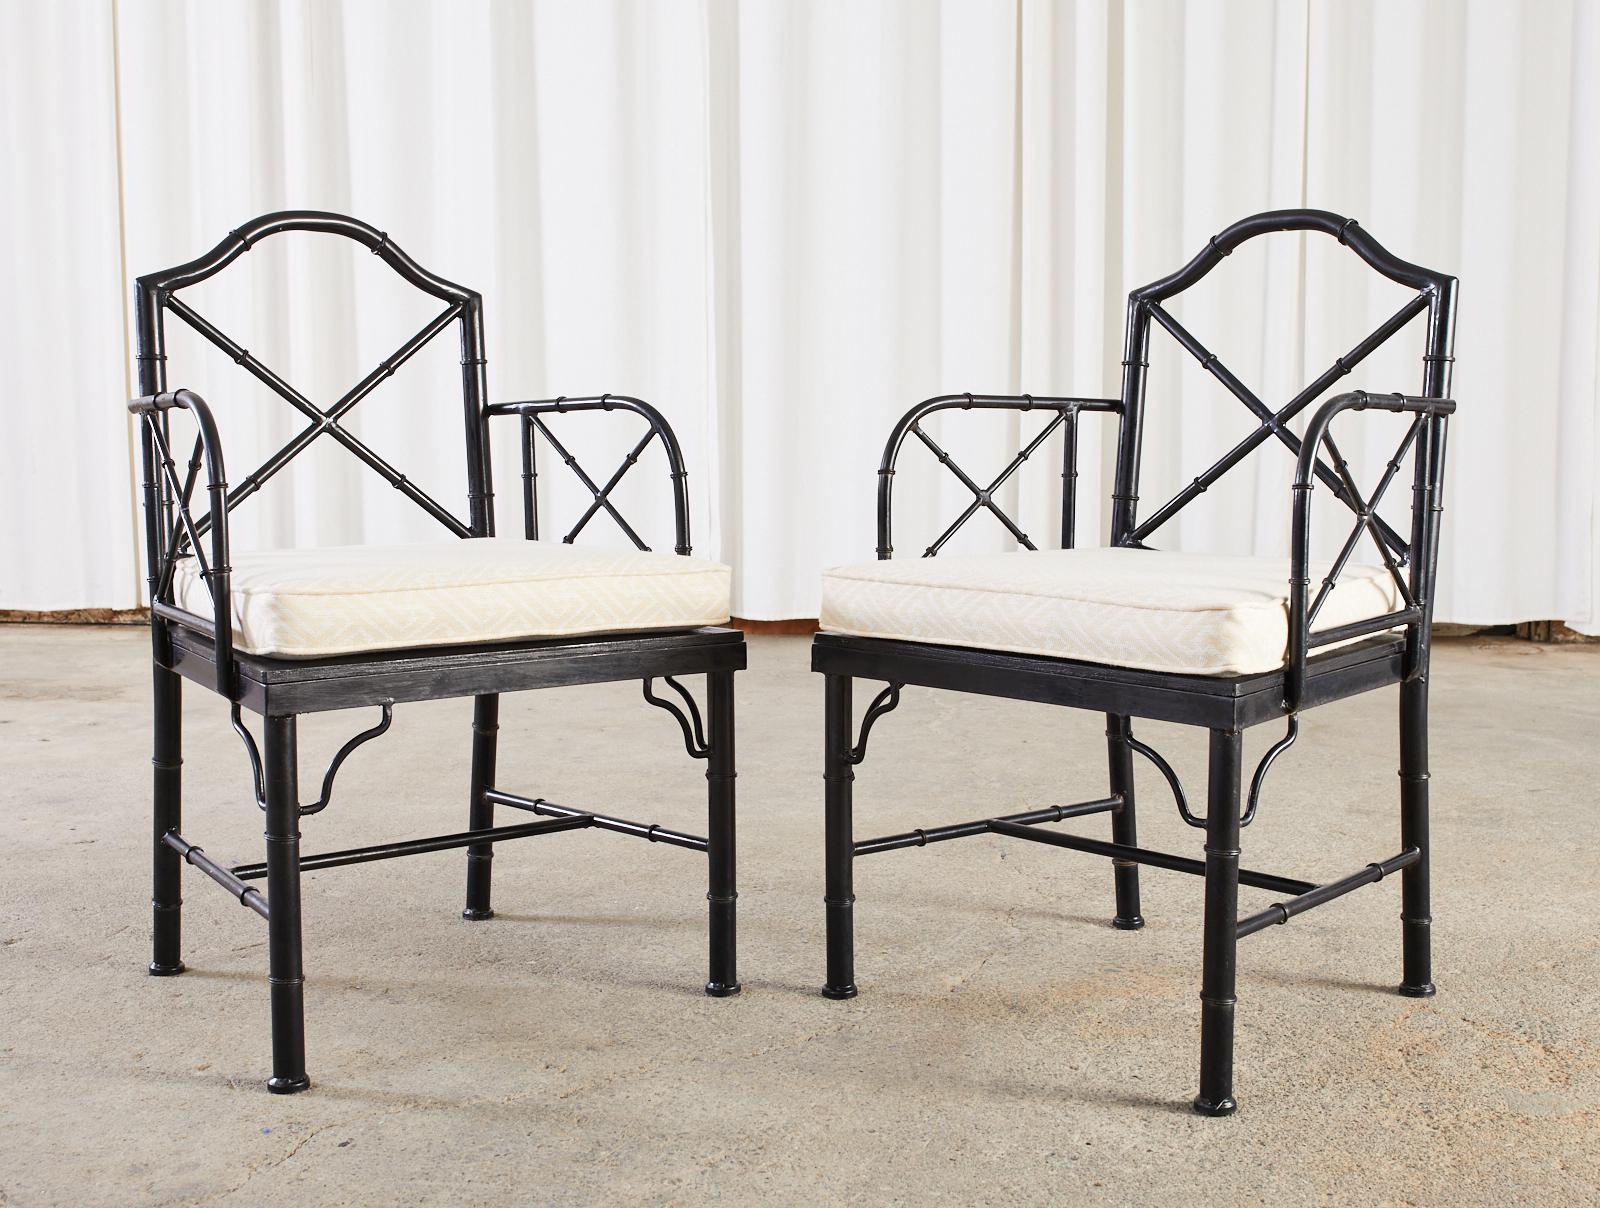 20th Century Chinese Chippendale Faux Bamboo Iron Garden Chairs For Sale